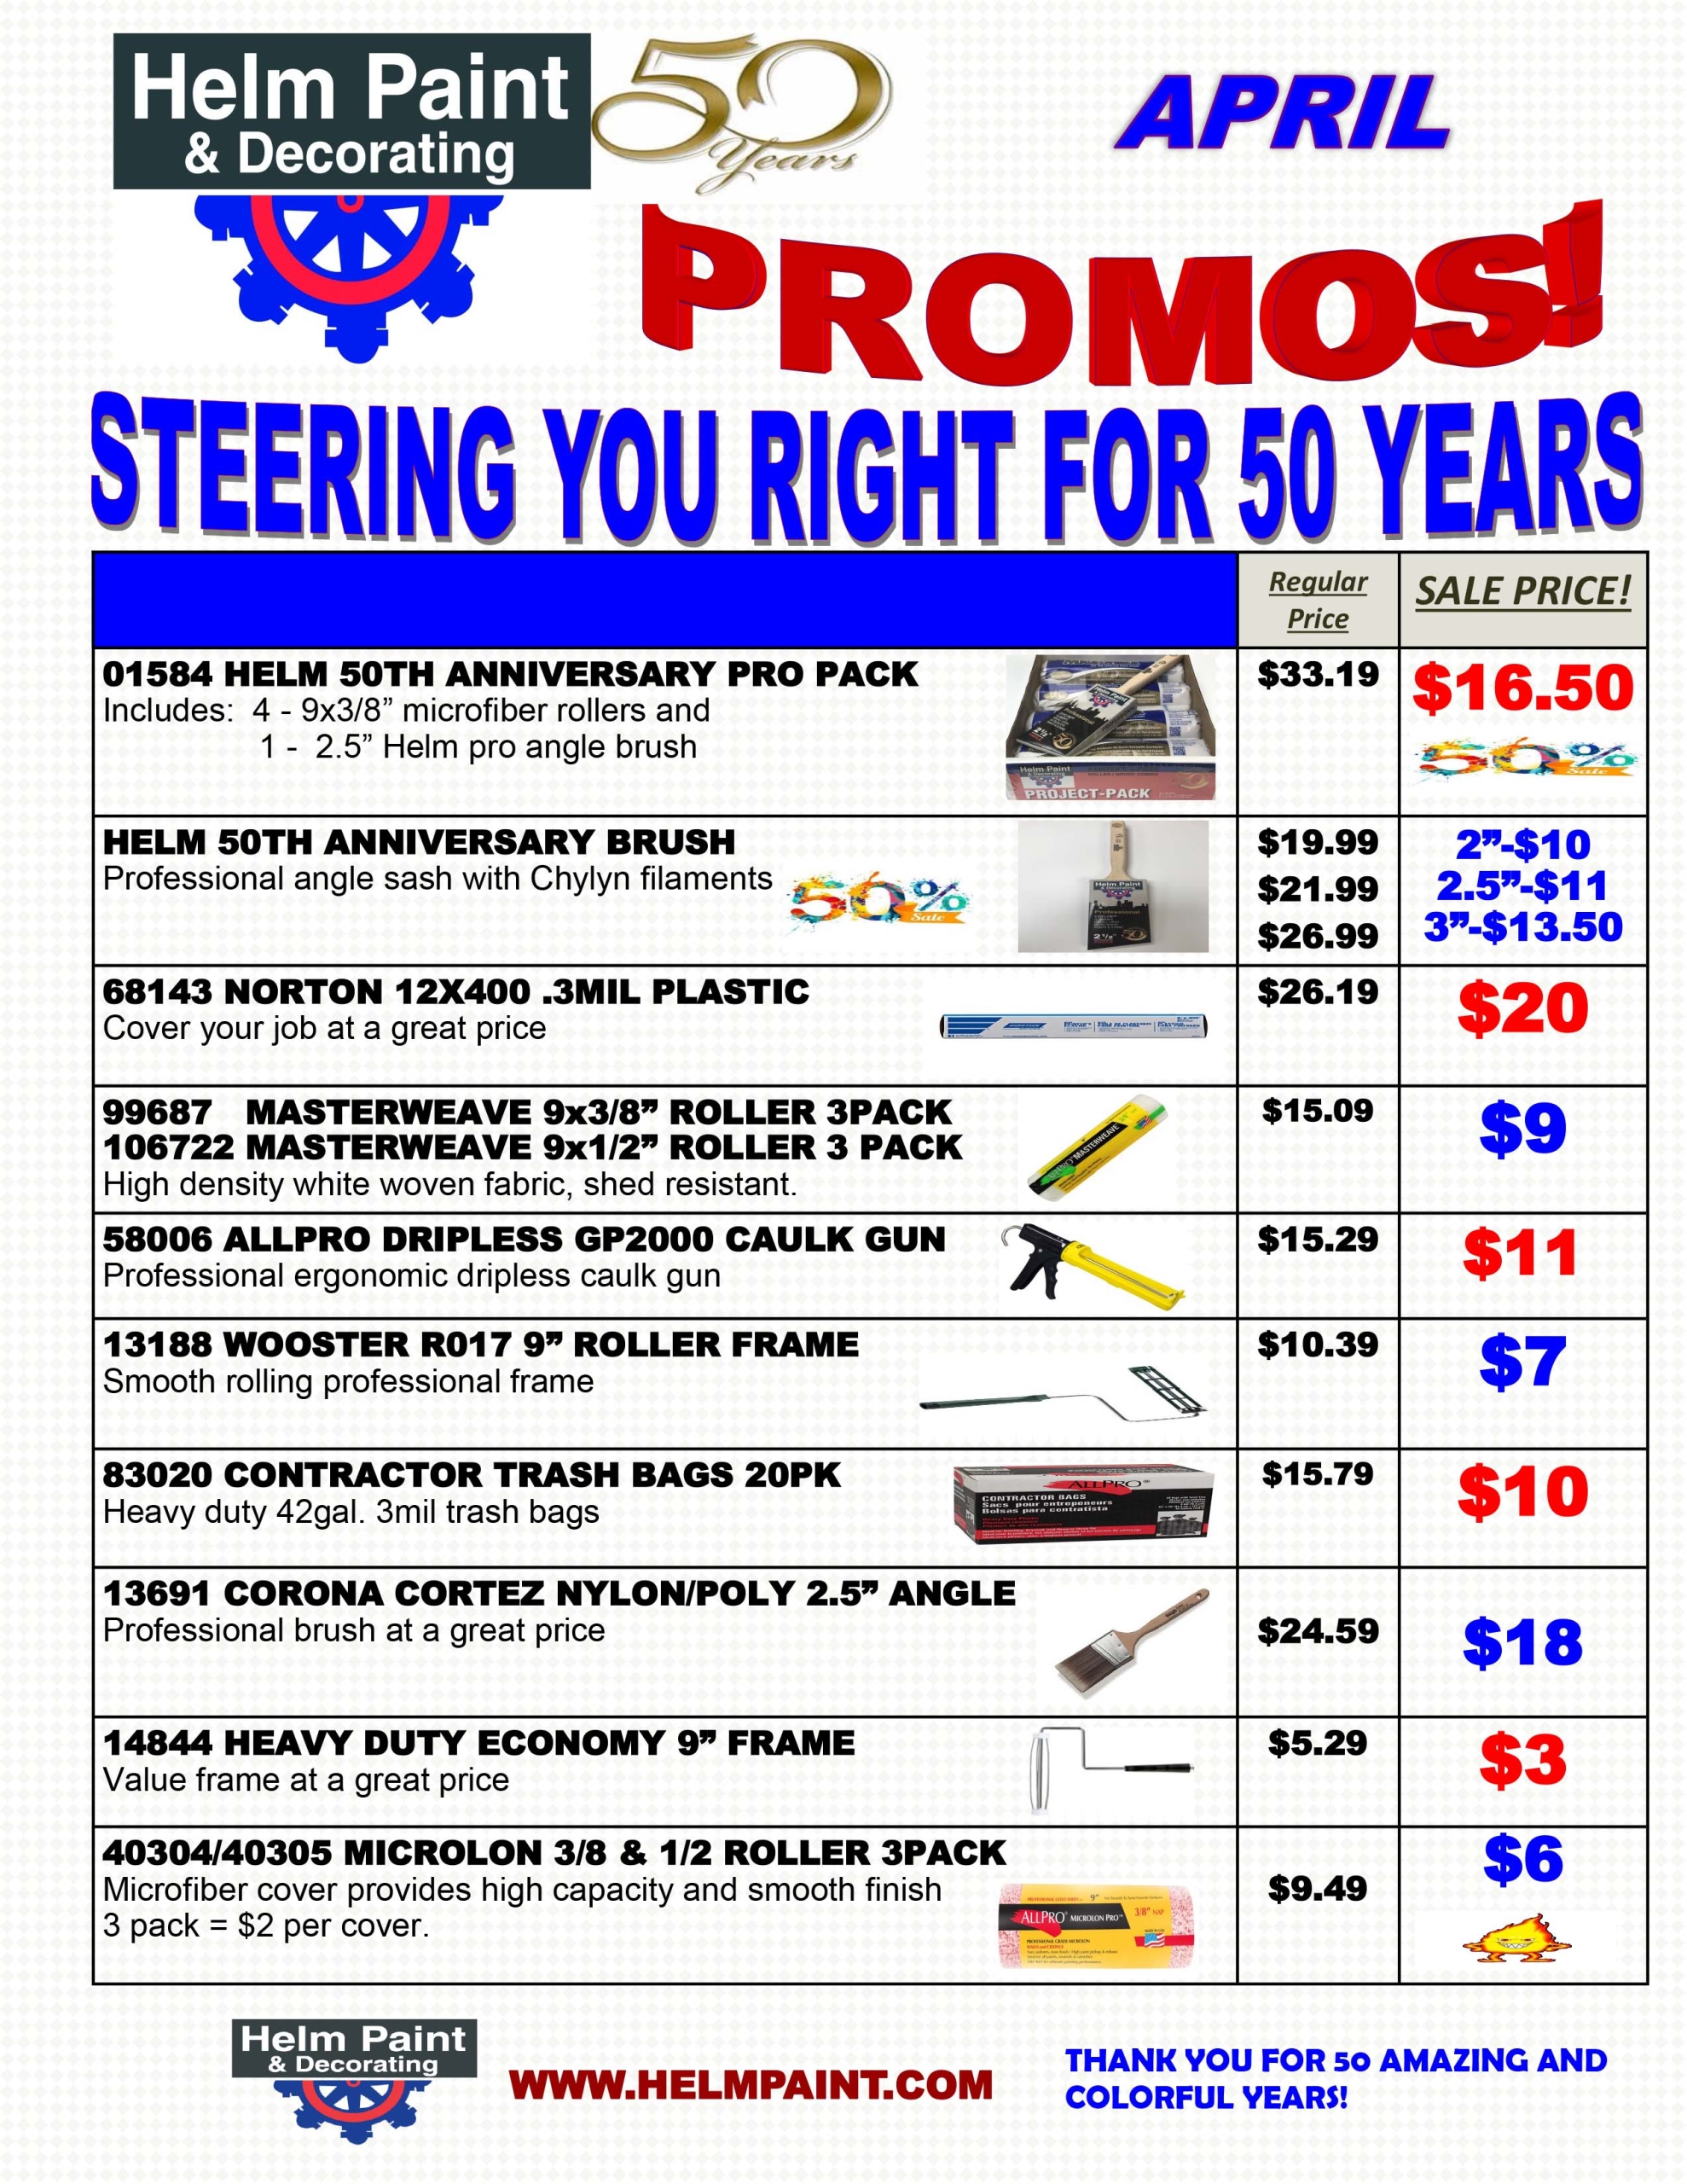 Sales Flyer and Special Offers